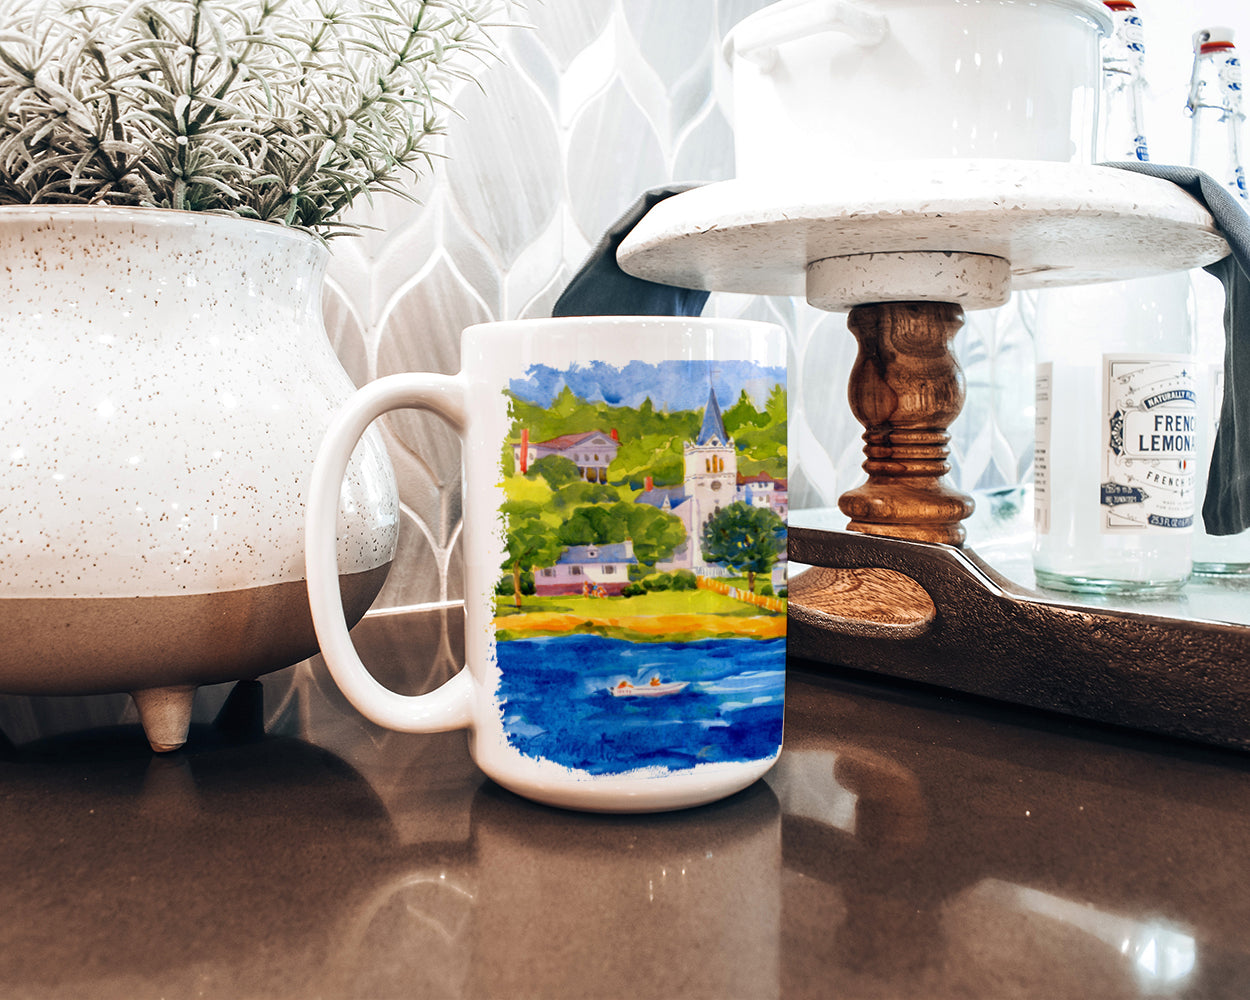 Harbour Scene with Sailboat Dishwasher Safe Microwavable Ceramic Coffee Mug 15 ounce 6031CM15